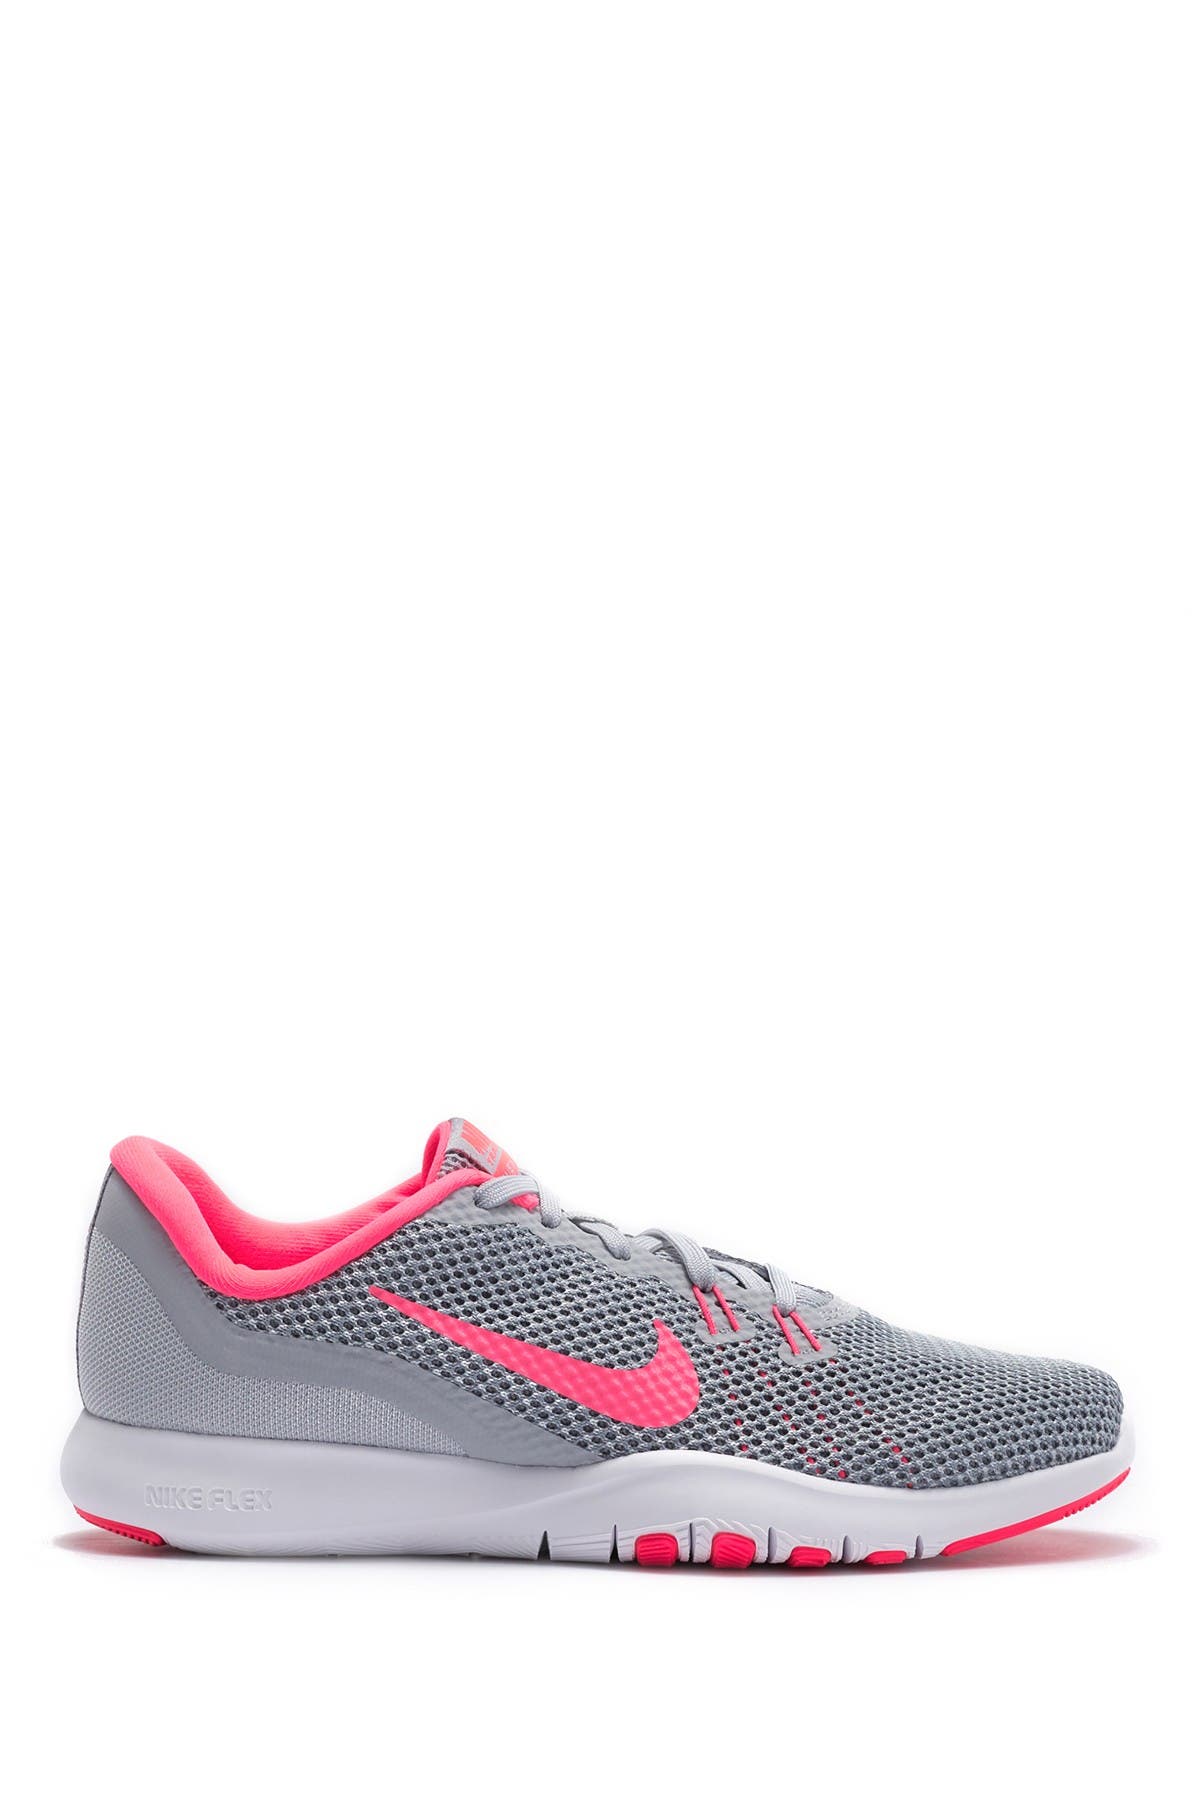 nike training flex trainer 7 in white and pink